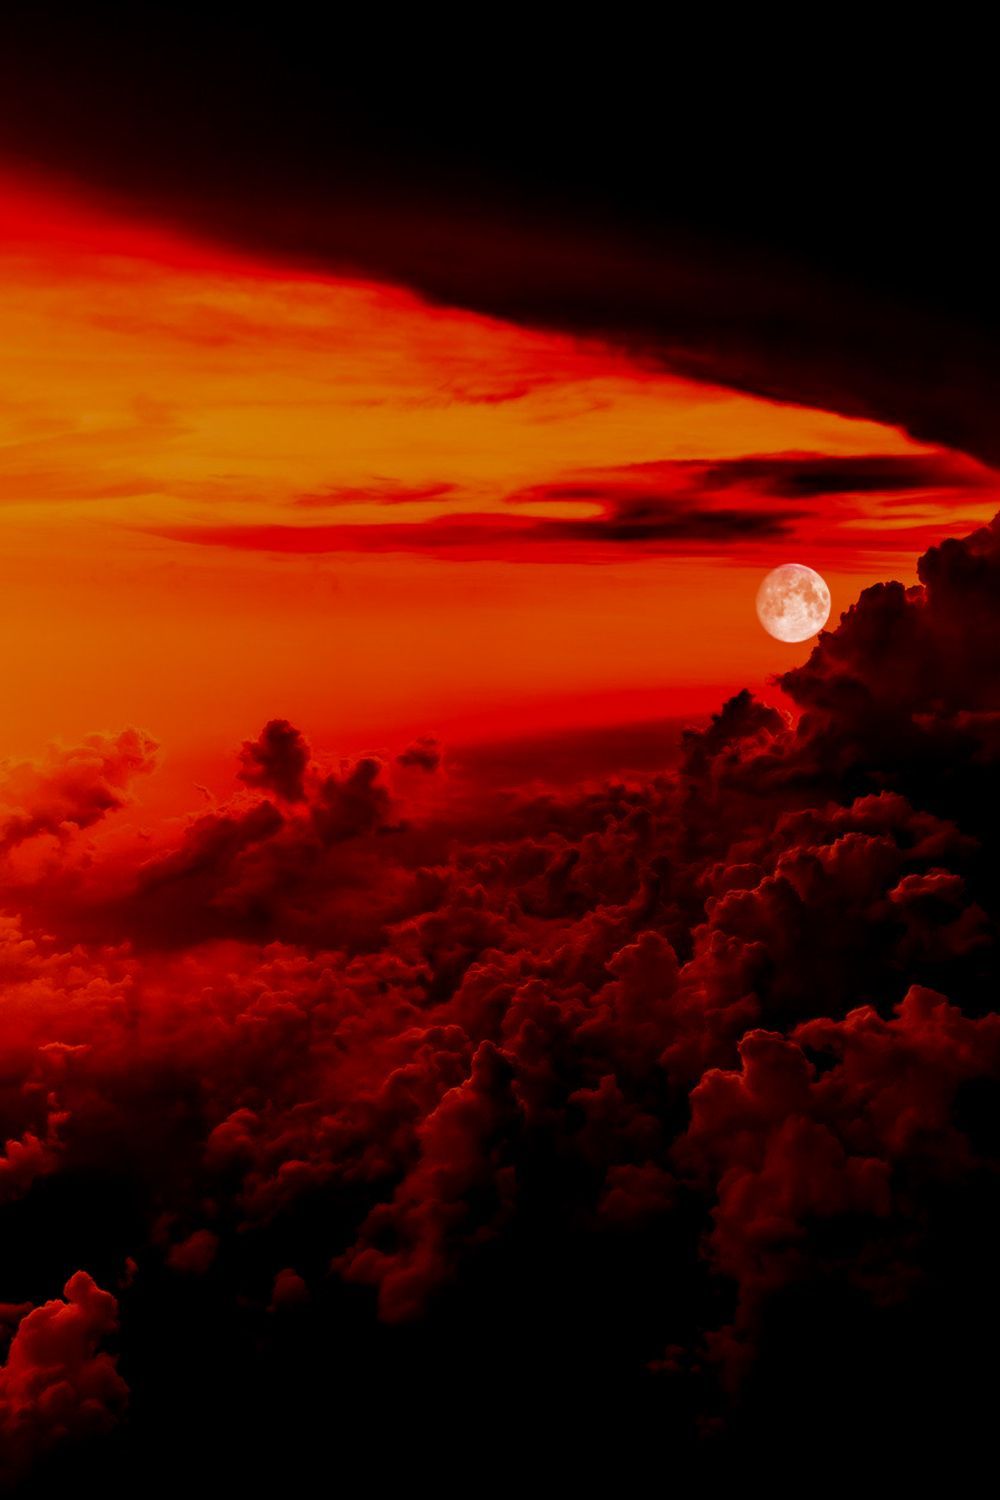 A red sunset with clouds in the background - Dark orange